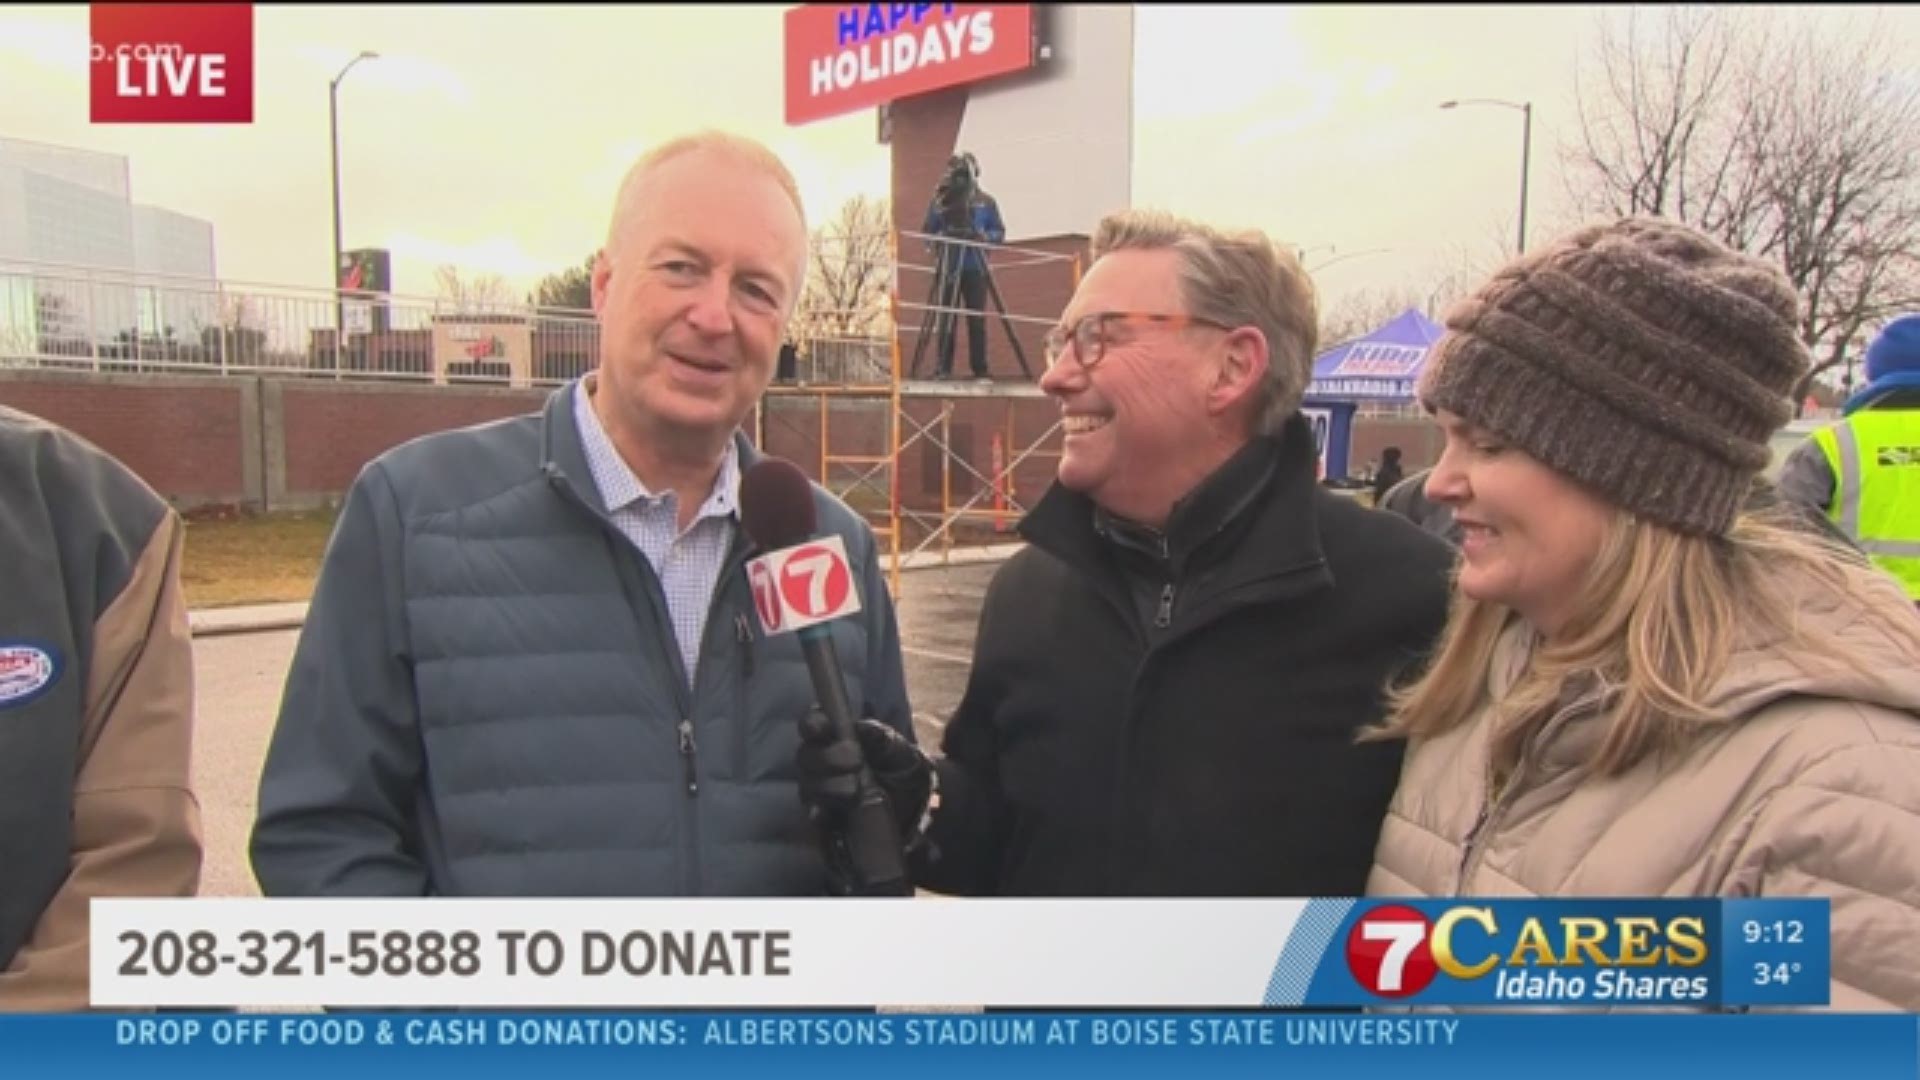 Armstrong started what is now a region-wide annual day of giving back in 2008, in the KTVB parking lot. He and his family continue to give their support.